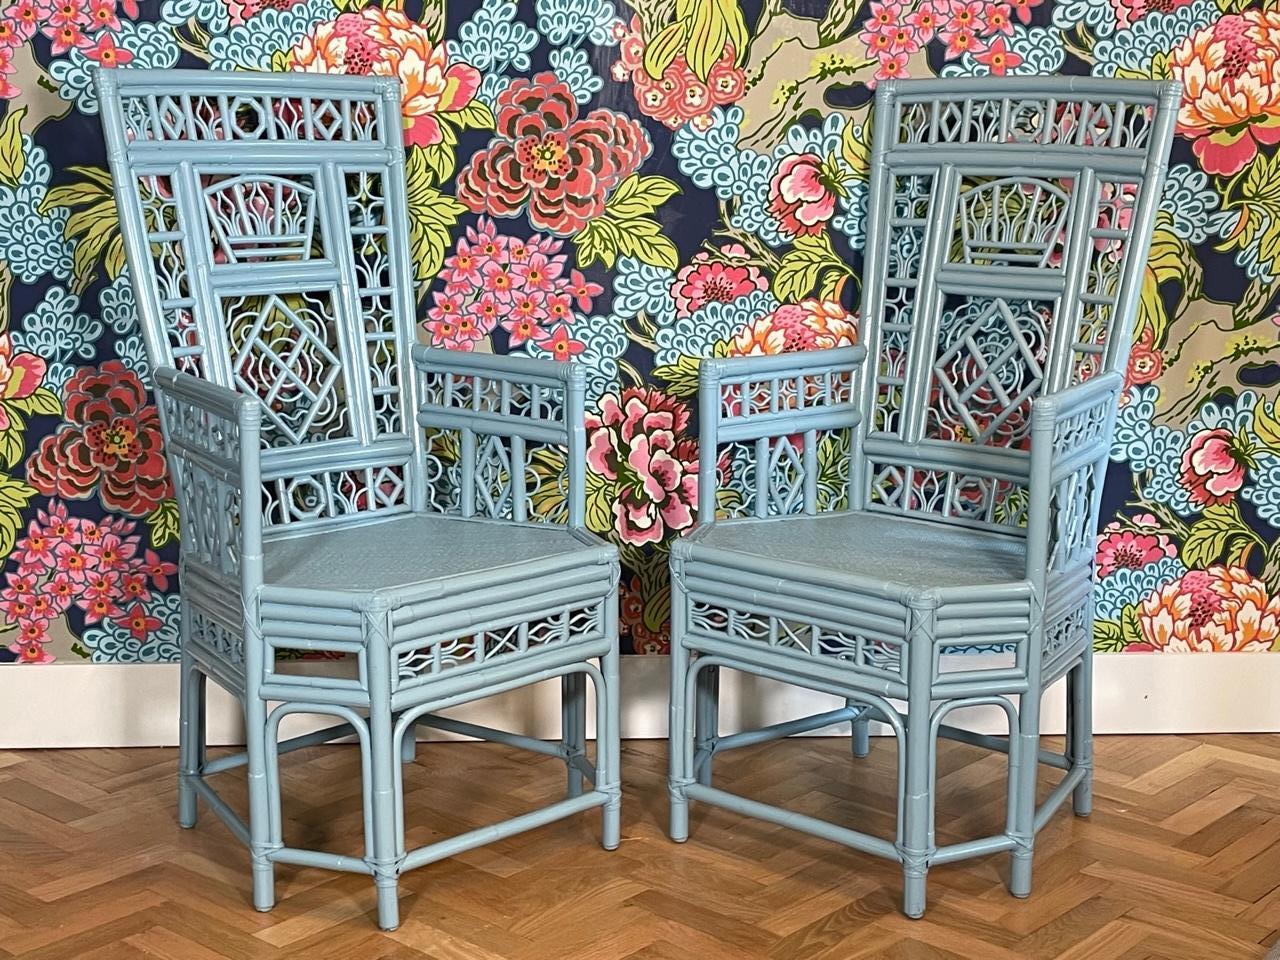 Pair of rattan high back arm chairs feature Chinese chippendale fretwork in the Brighton pavilion style. Finished in gloss lacquer, color is Sherwin Williams #2344 